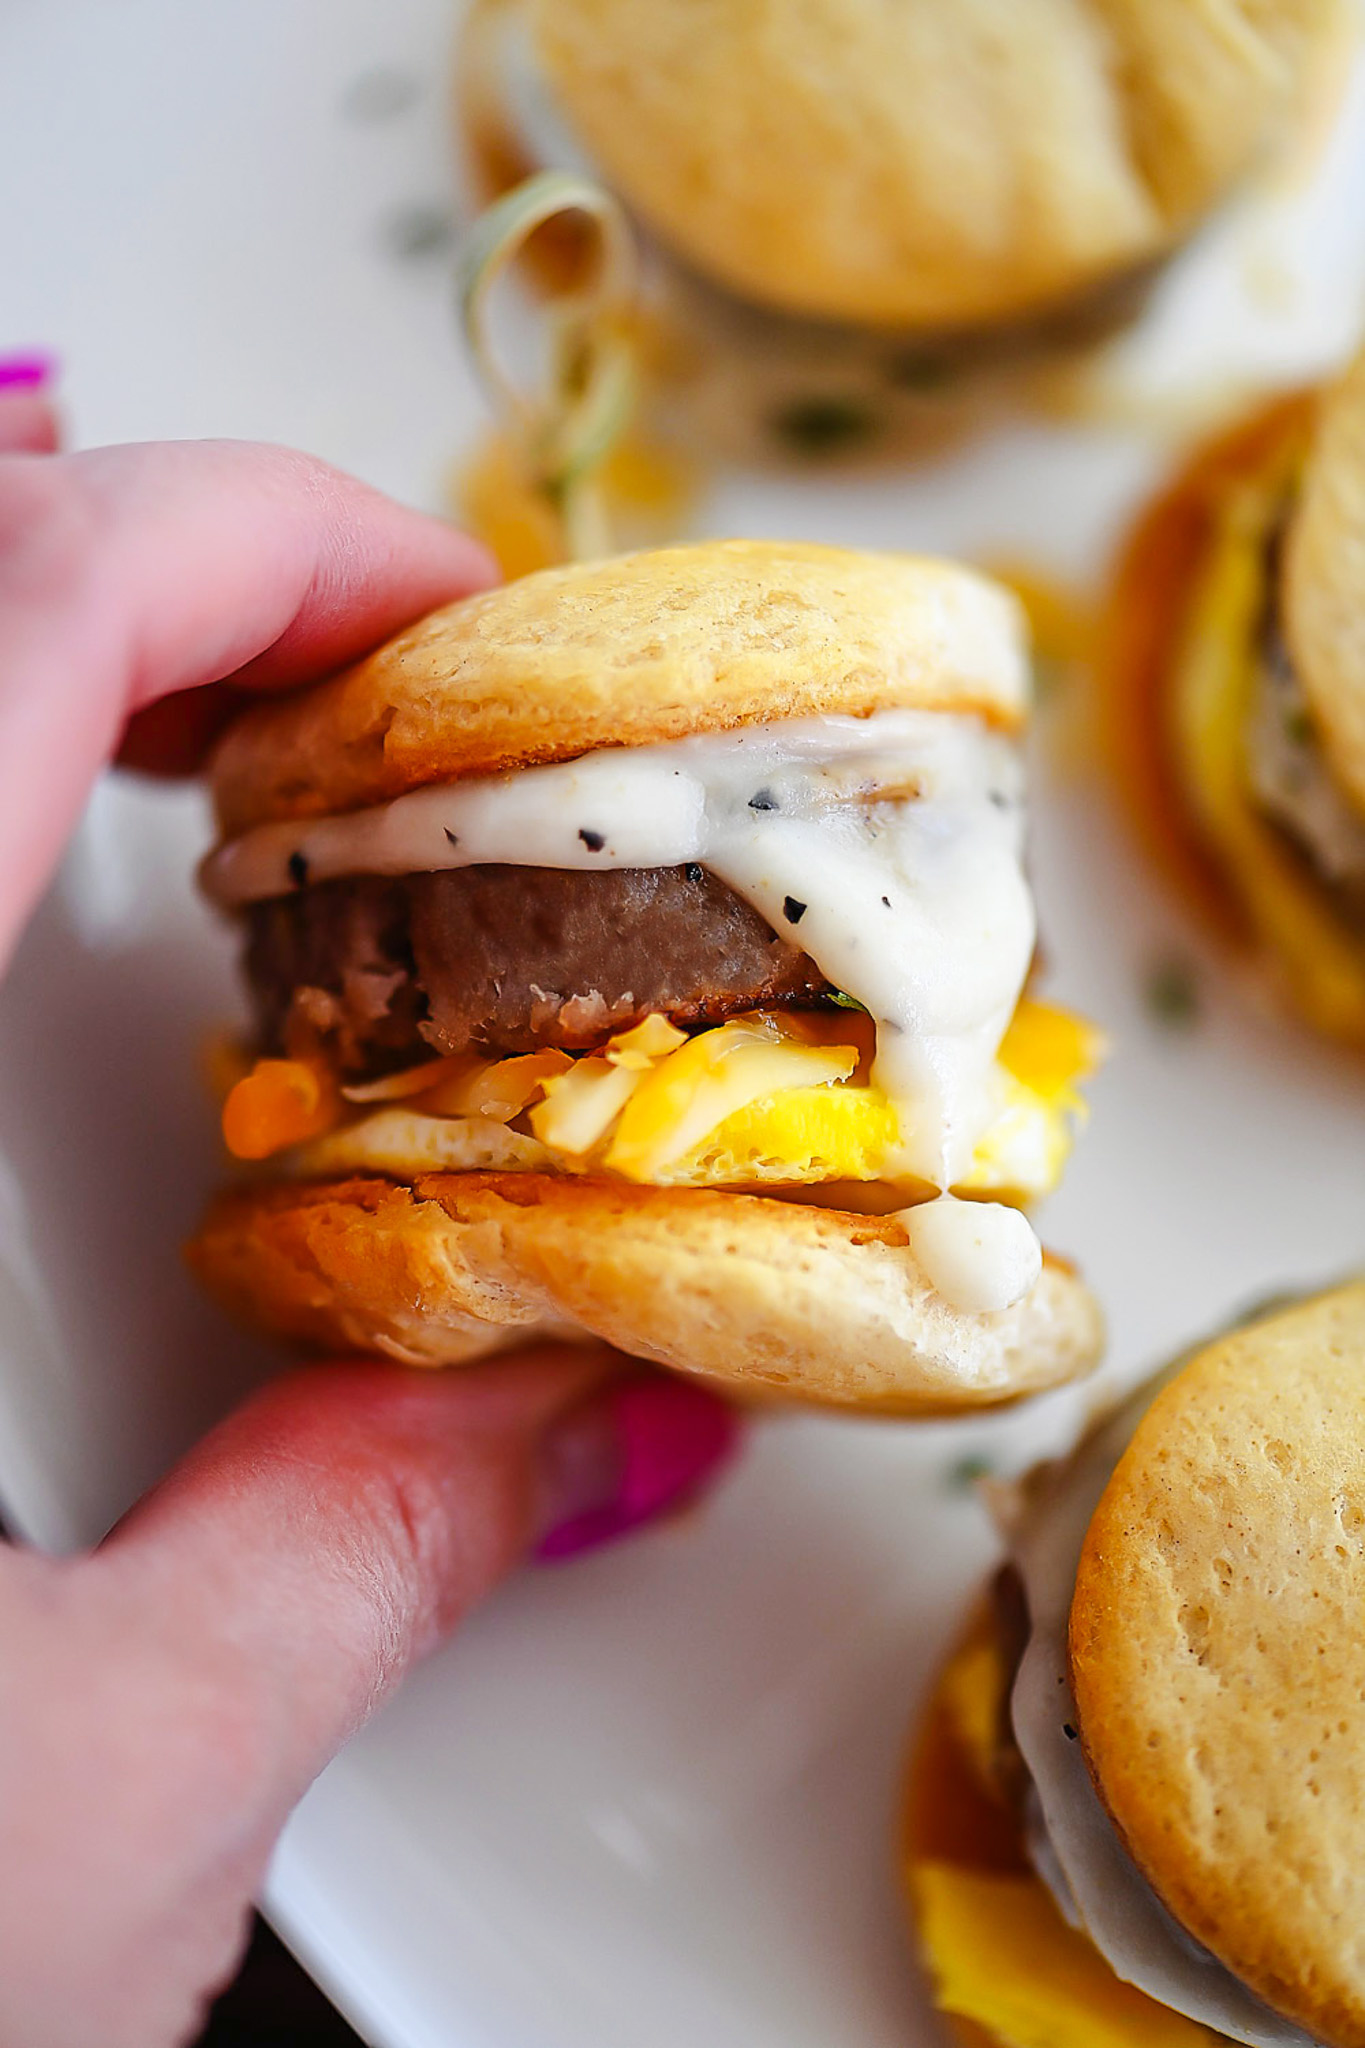 Little savory breakfast sandwiches that will brighten up any morning.  These little sliders are layered with flavor and packed with your morning protein.